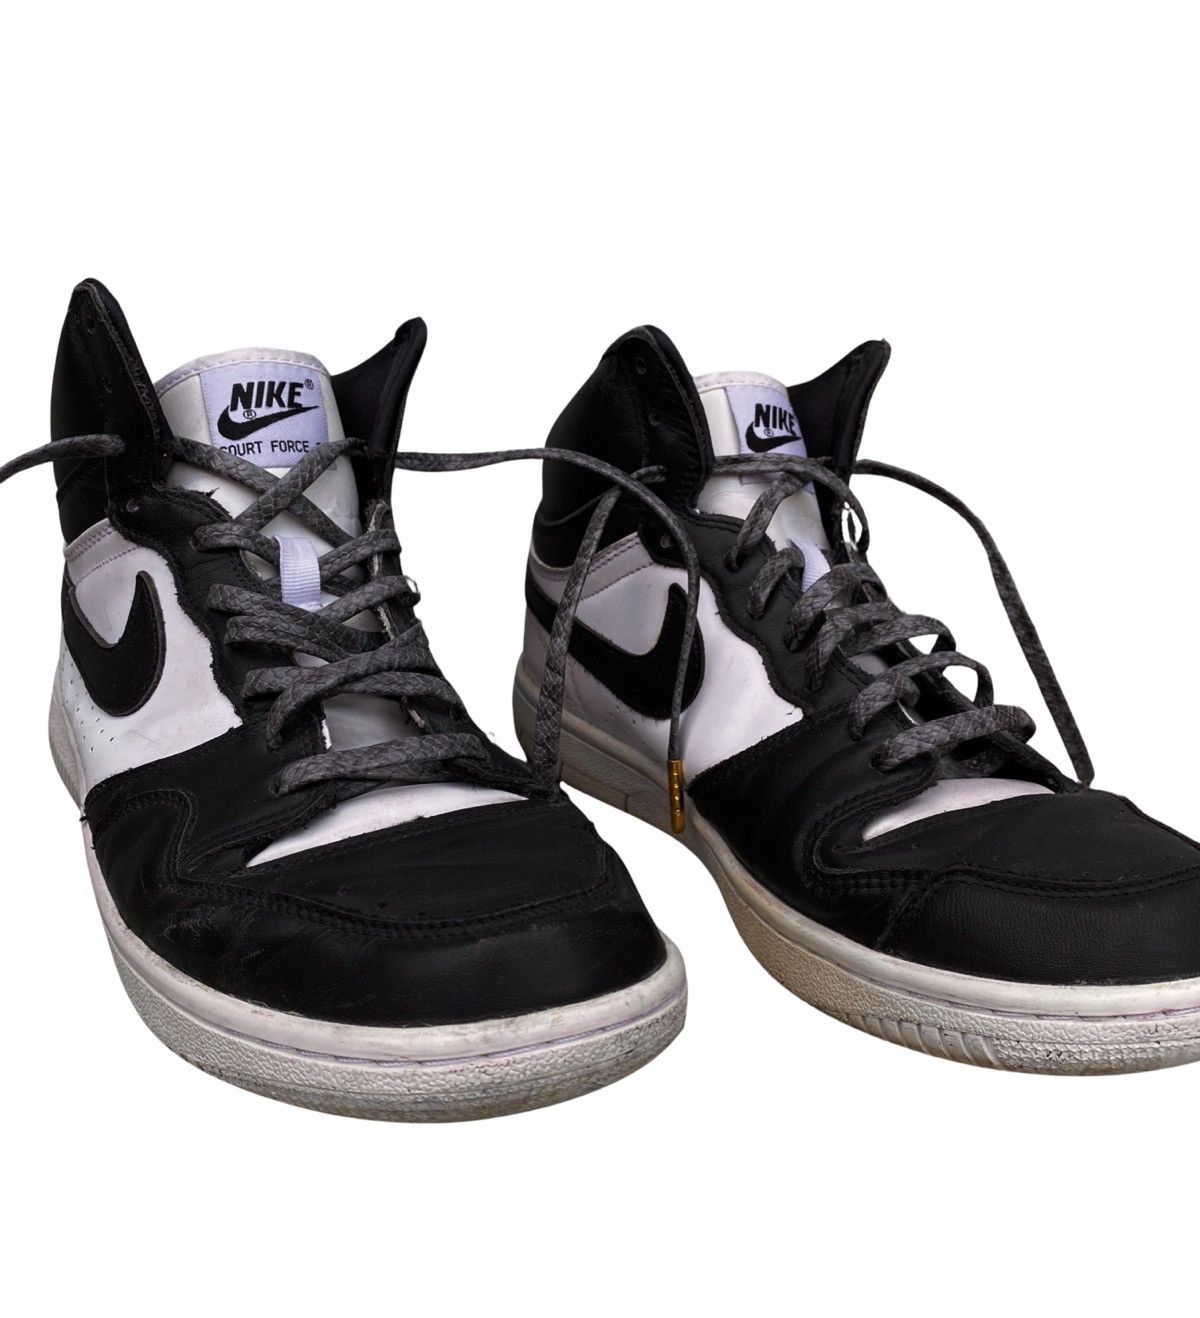 UNDERCOVER X NIKE 2015 HIGH DUNK COURT FORCE - 2